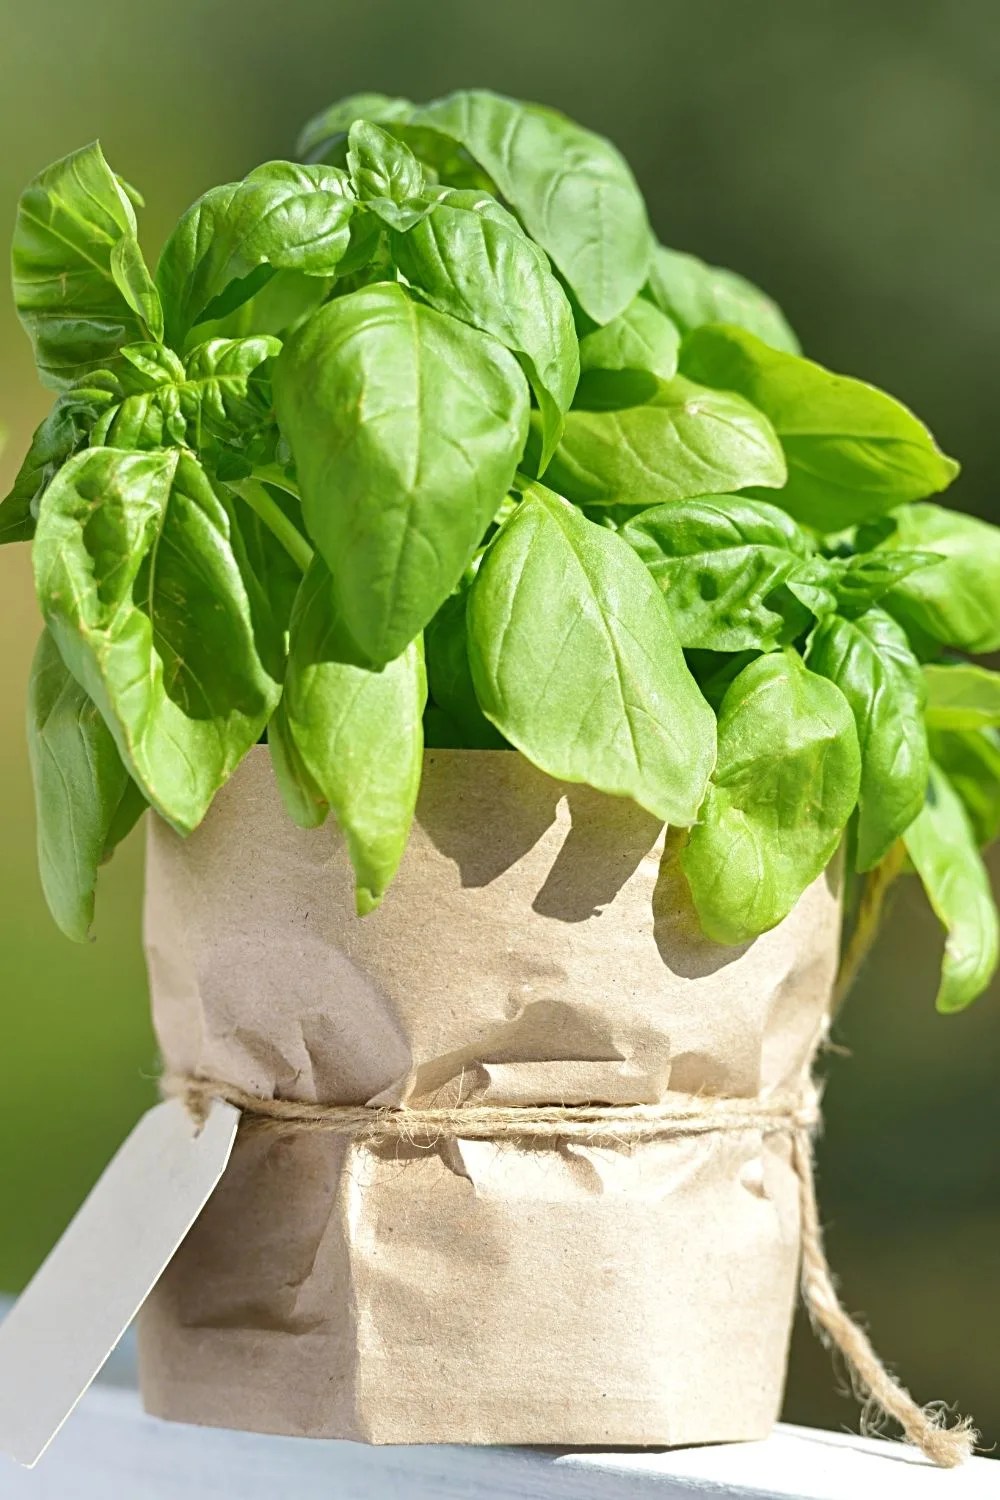 Basil is another tasty herb you can grow in pots on your east-facing balcony